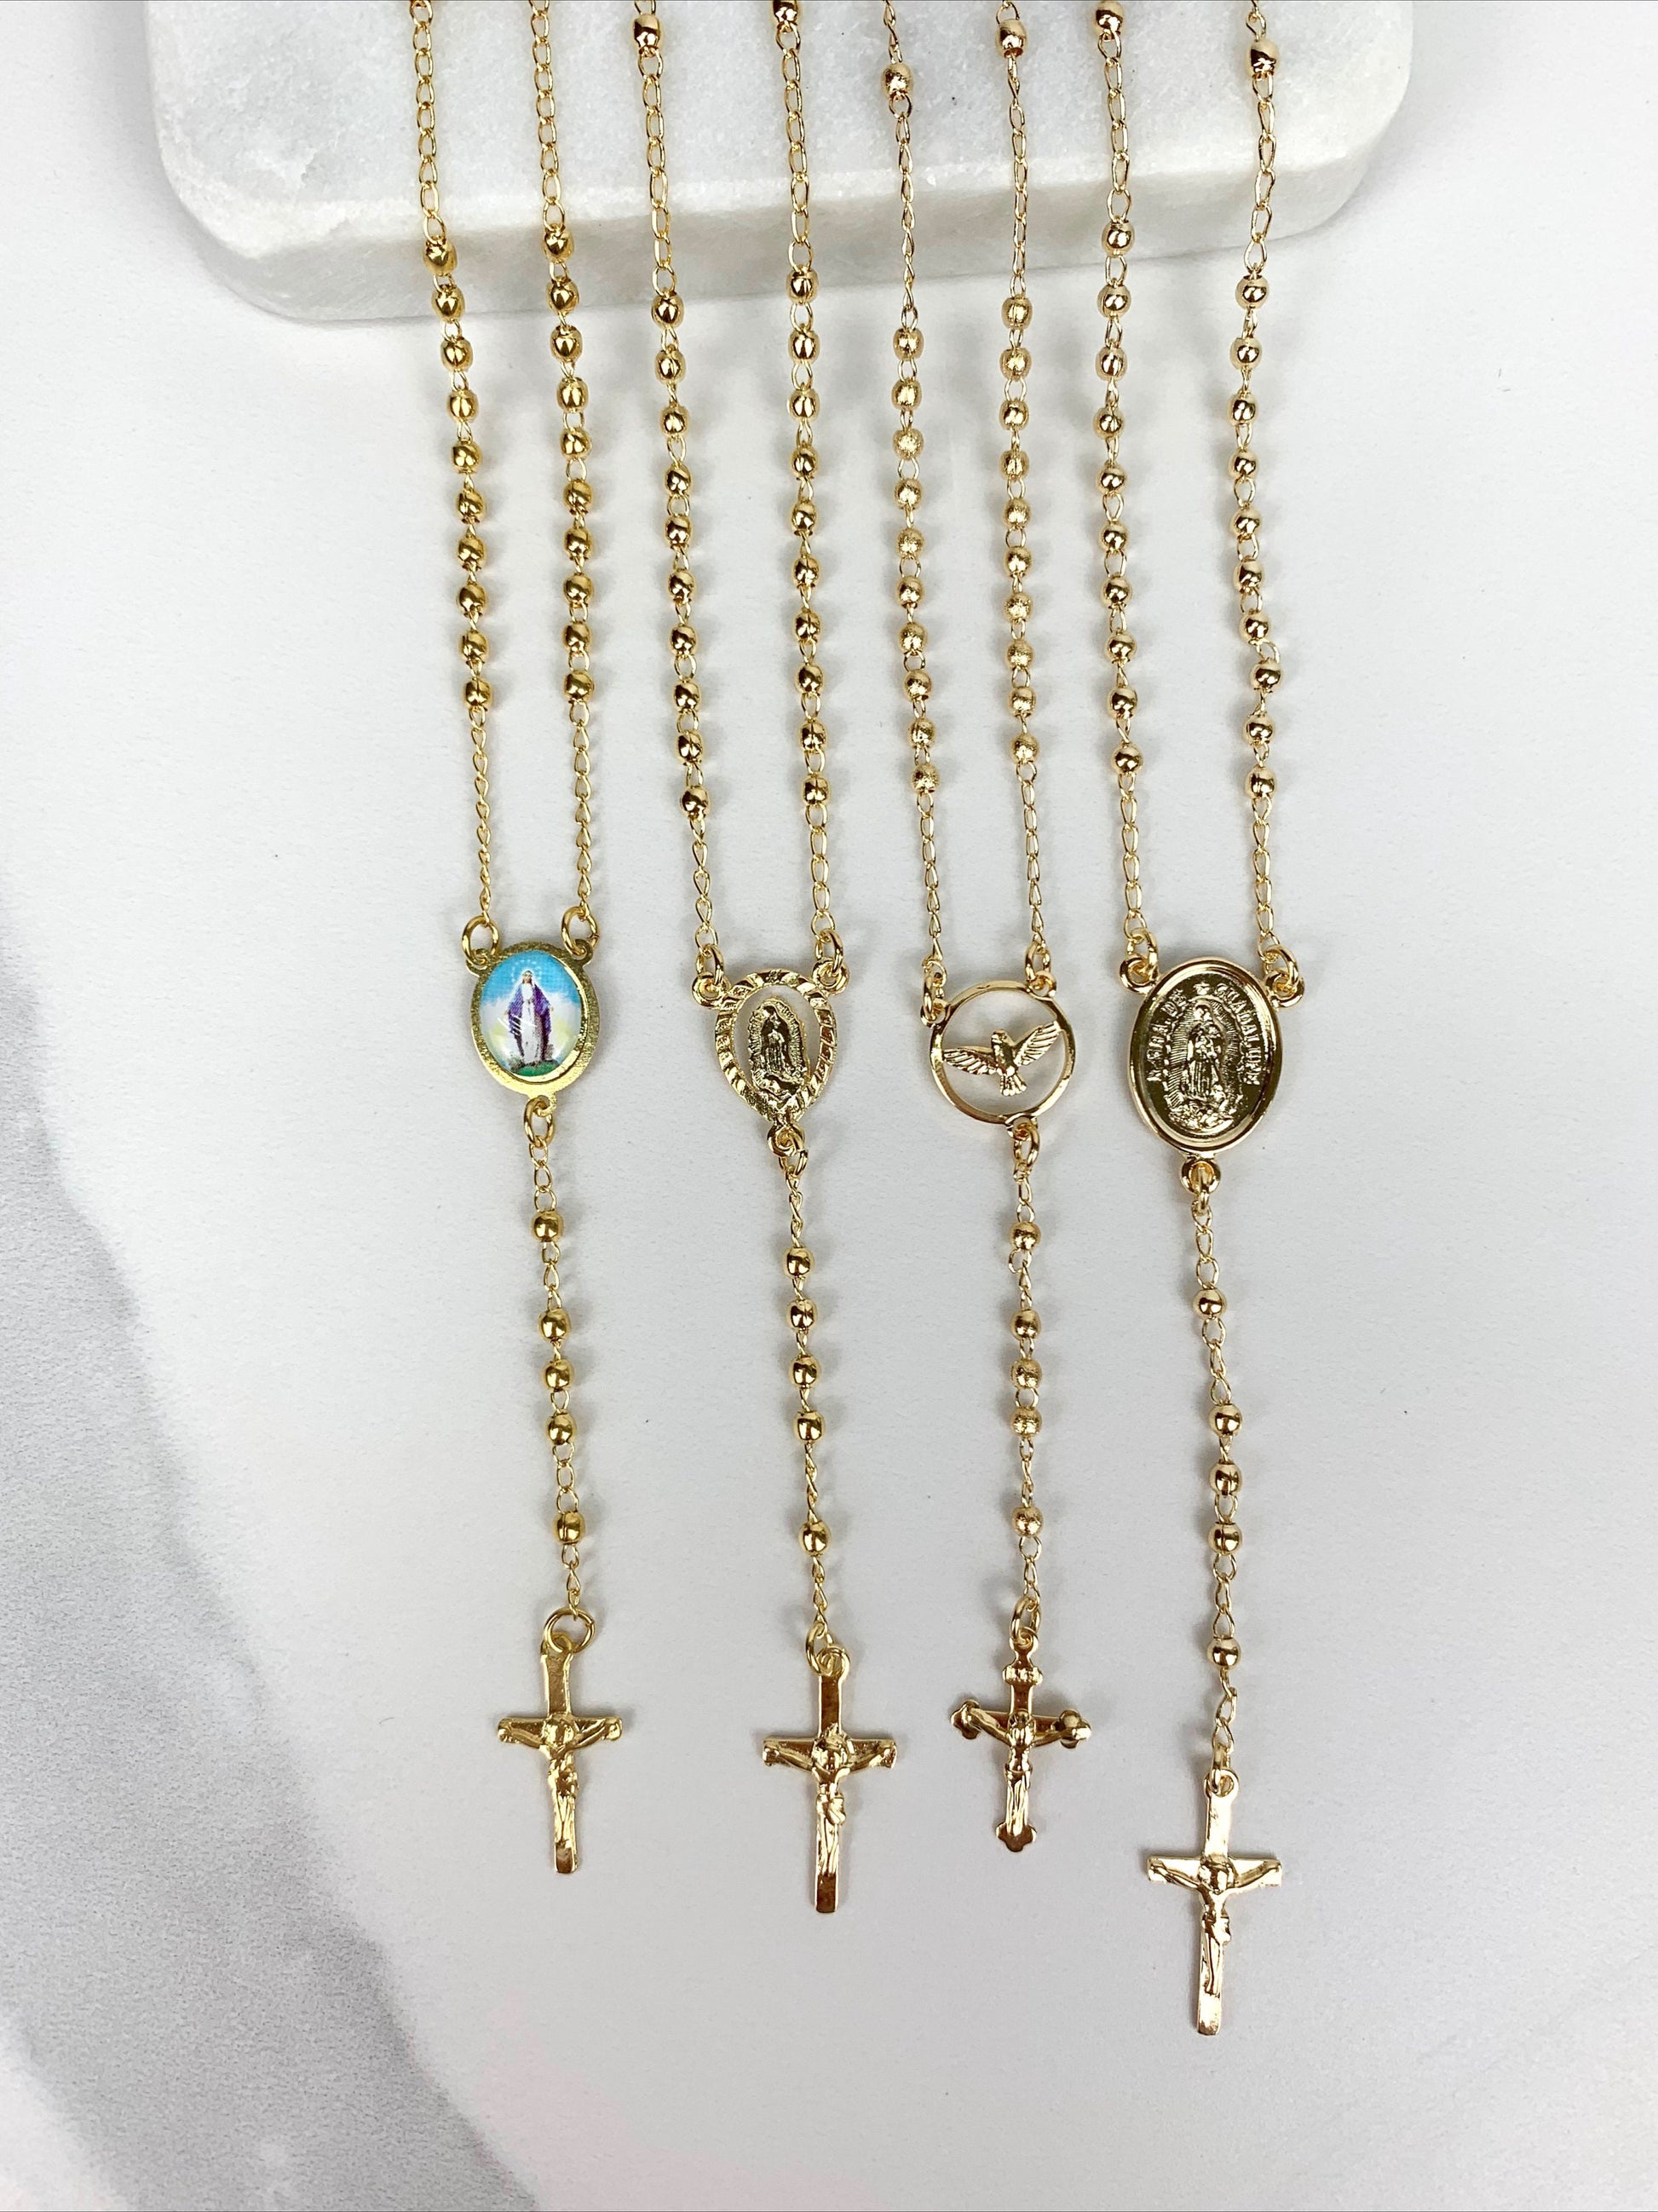 18k Gold Filled Peace Ave, Maria Virgen, Guadalupe Virgen Rosaries Wholesale Jewelry Supplies